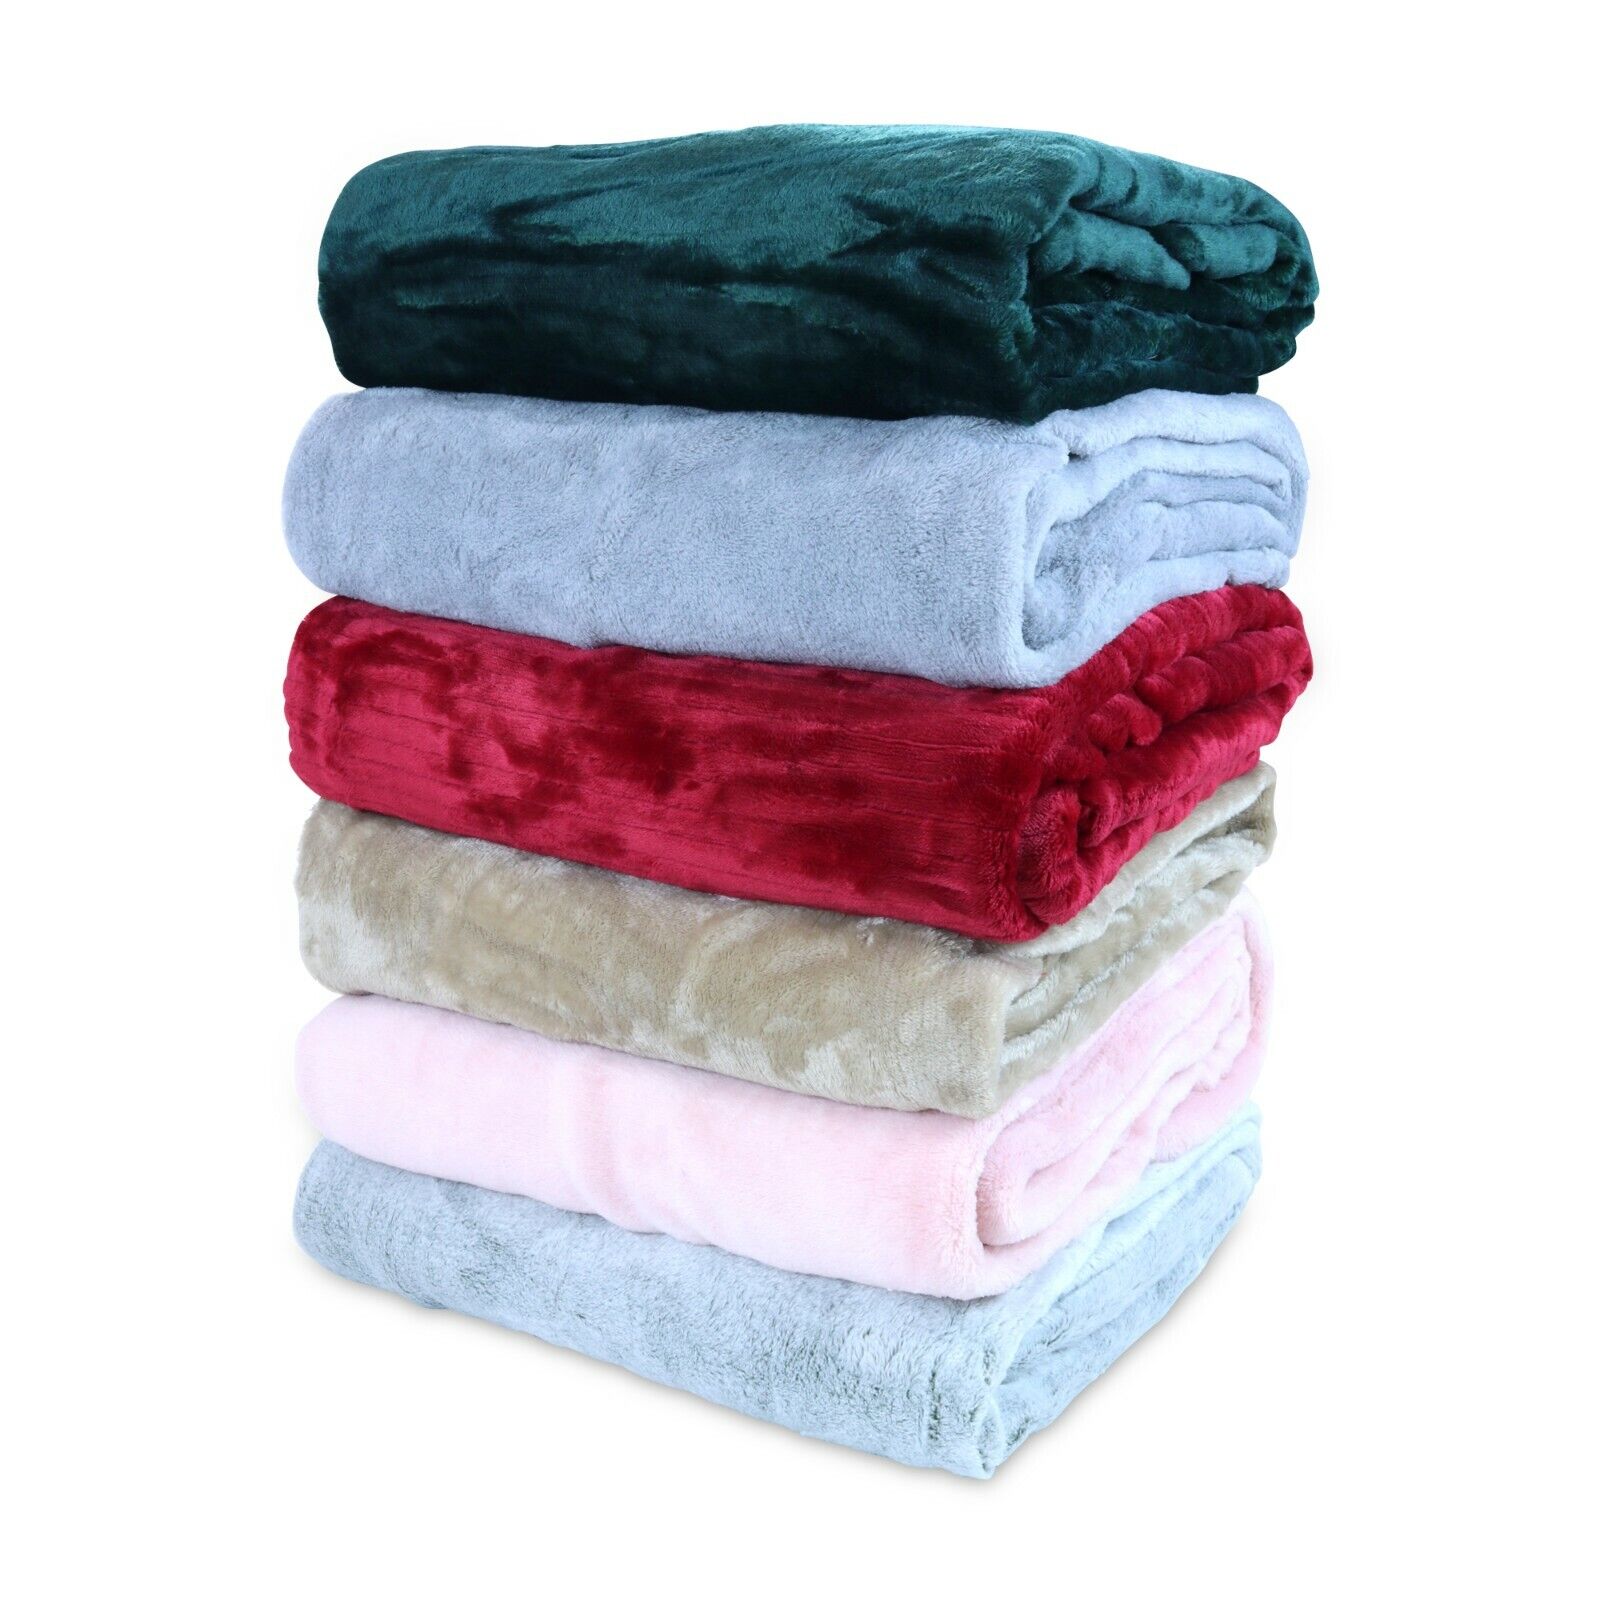 Bulk Lot of 12 Coral Fleece Blankets - 50 x 60 Assorted Soft Throw Blanket Set Arkwright Does Not Apply